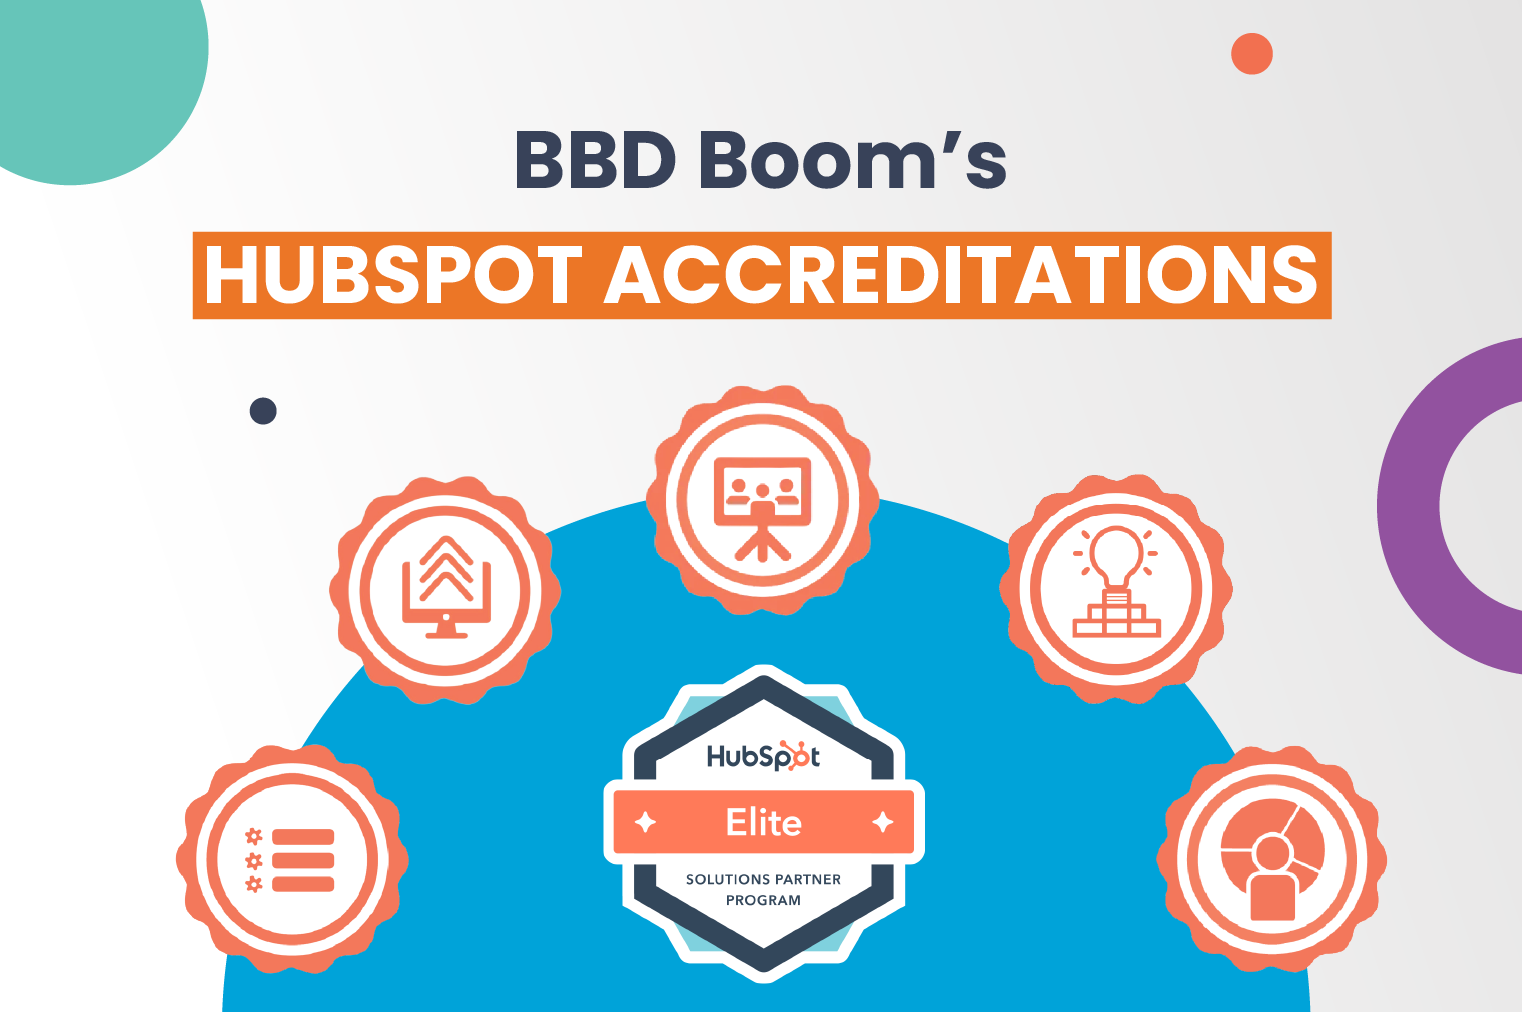 How BBD Boom's HubSpot Accreditations Benefit Your CRM Strategy